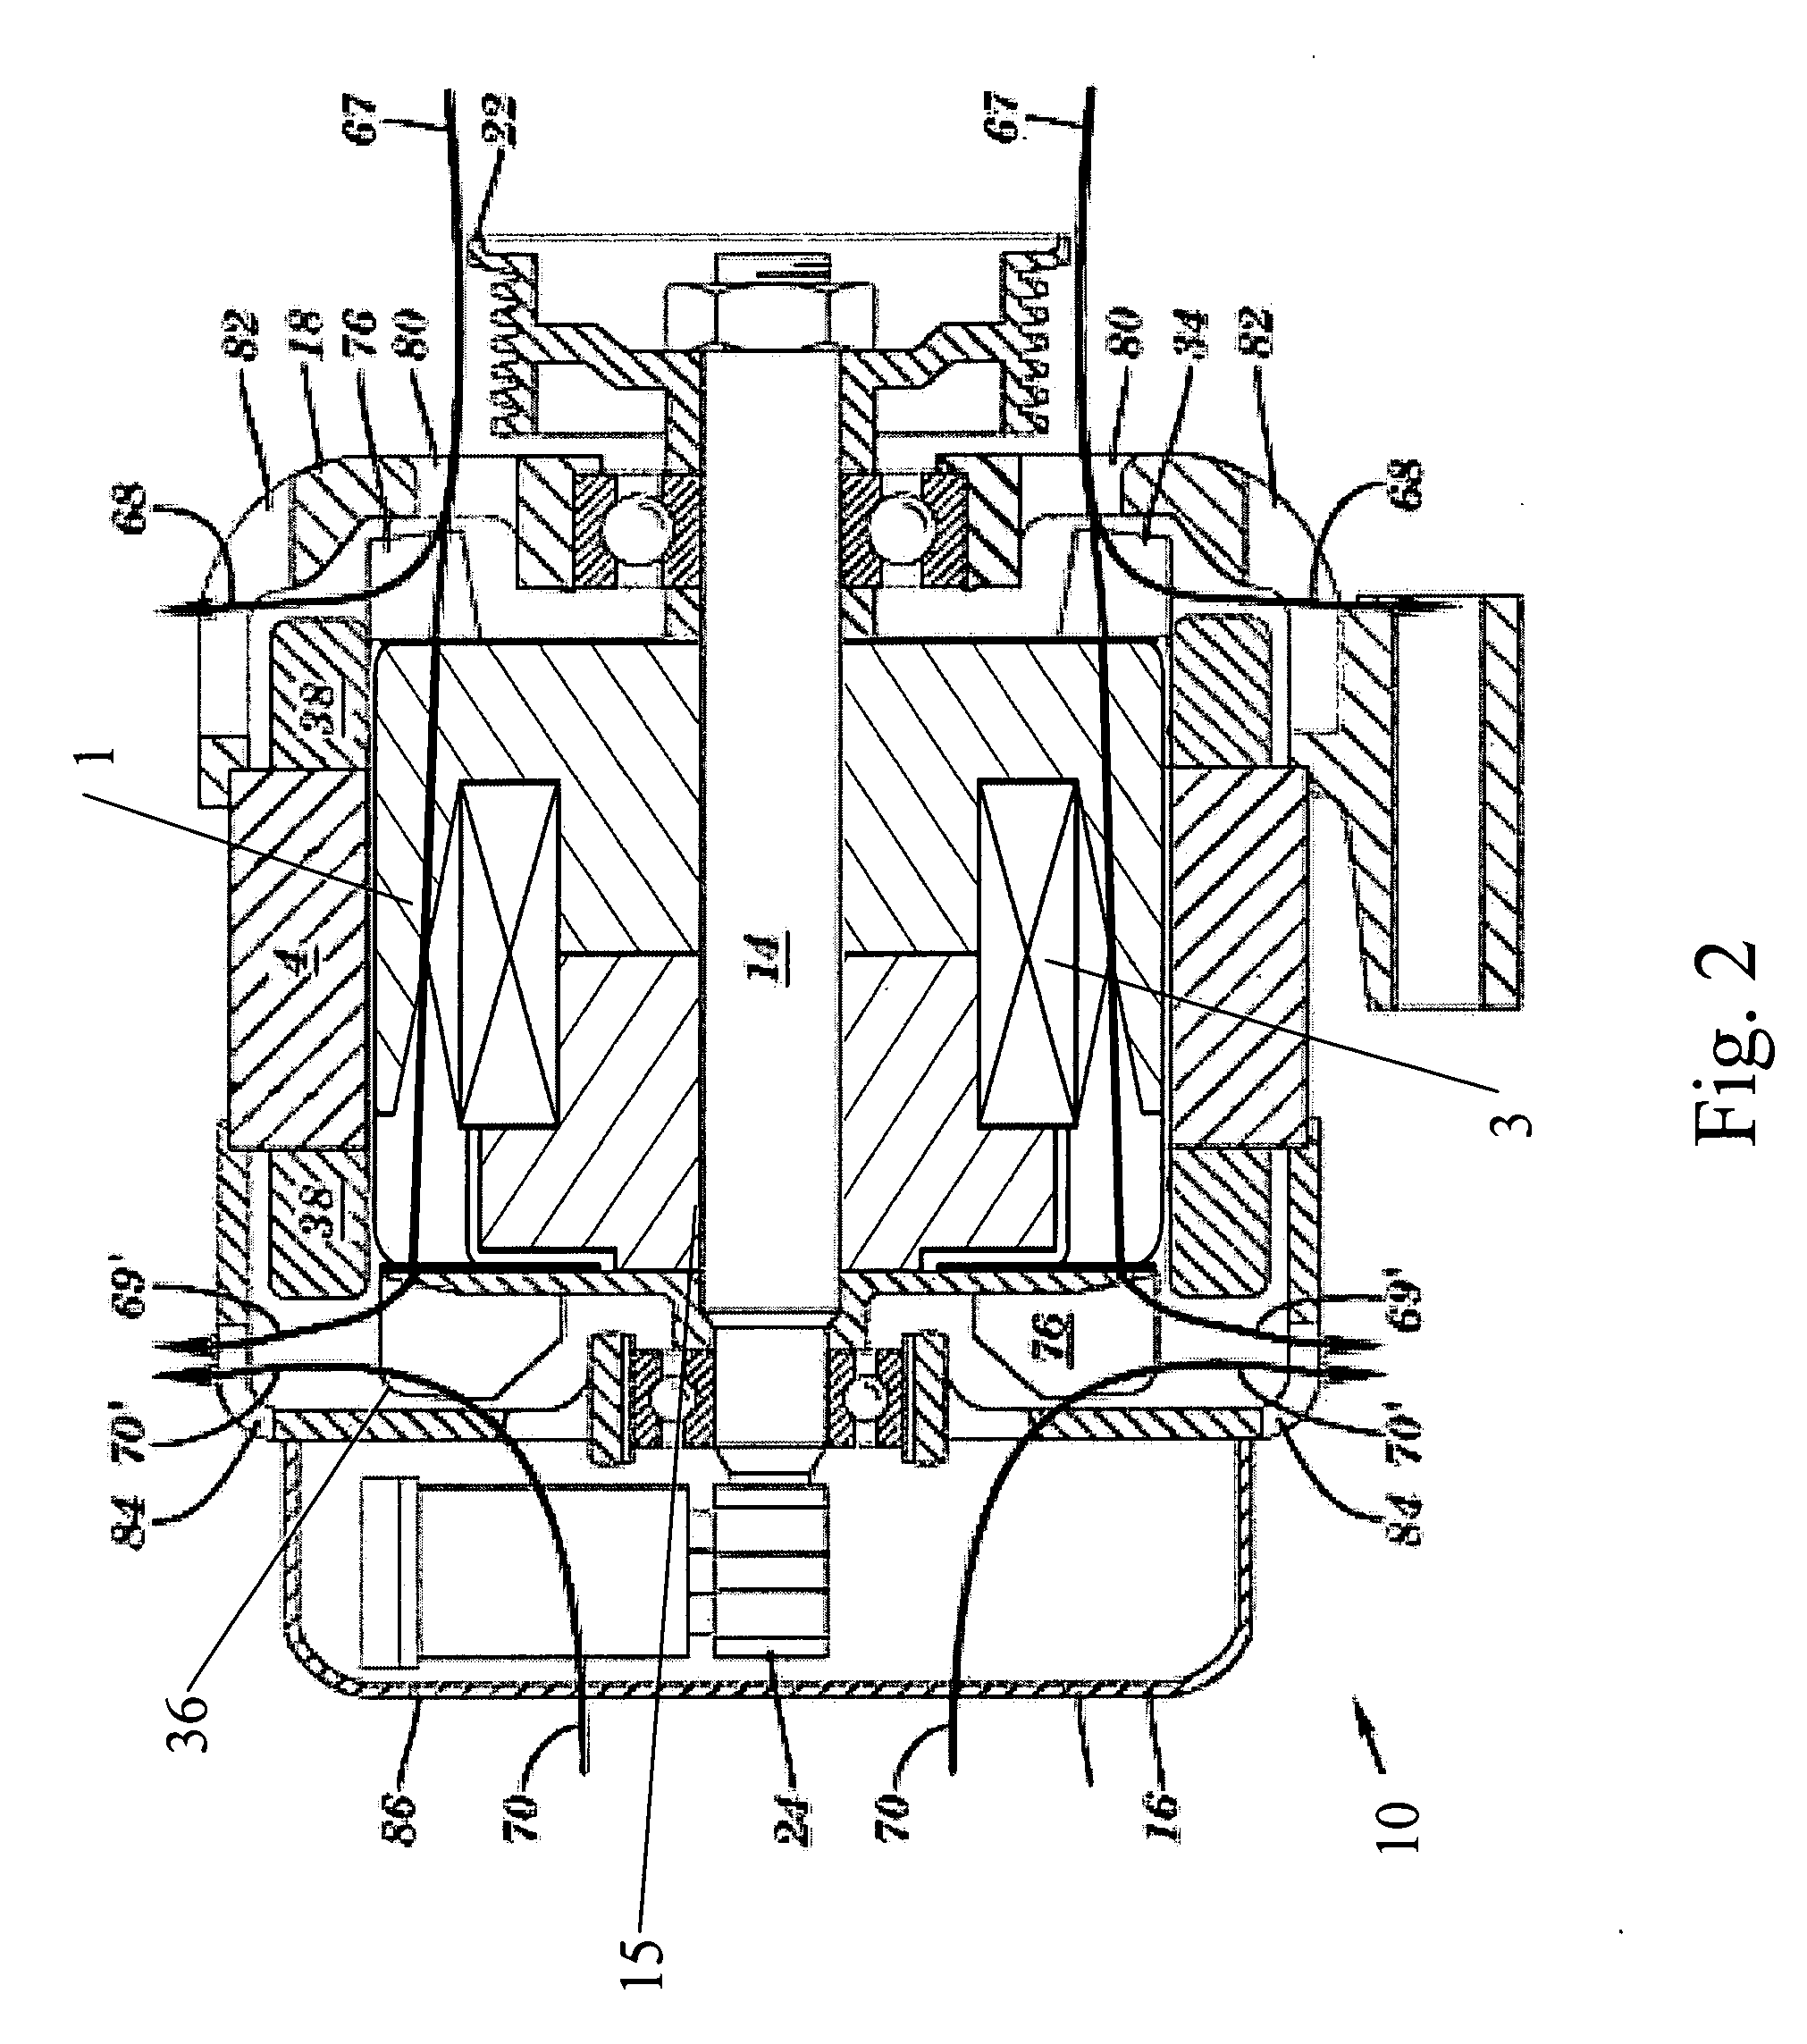 Electronic package for electrical machine